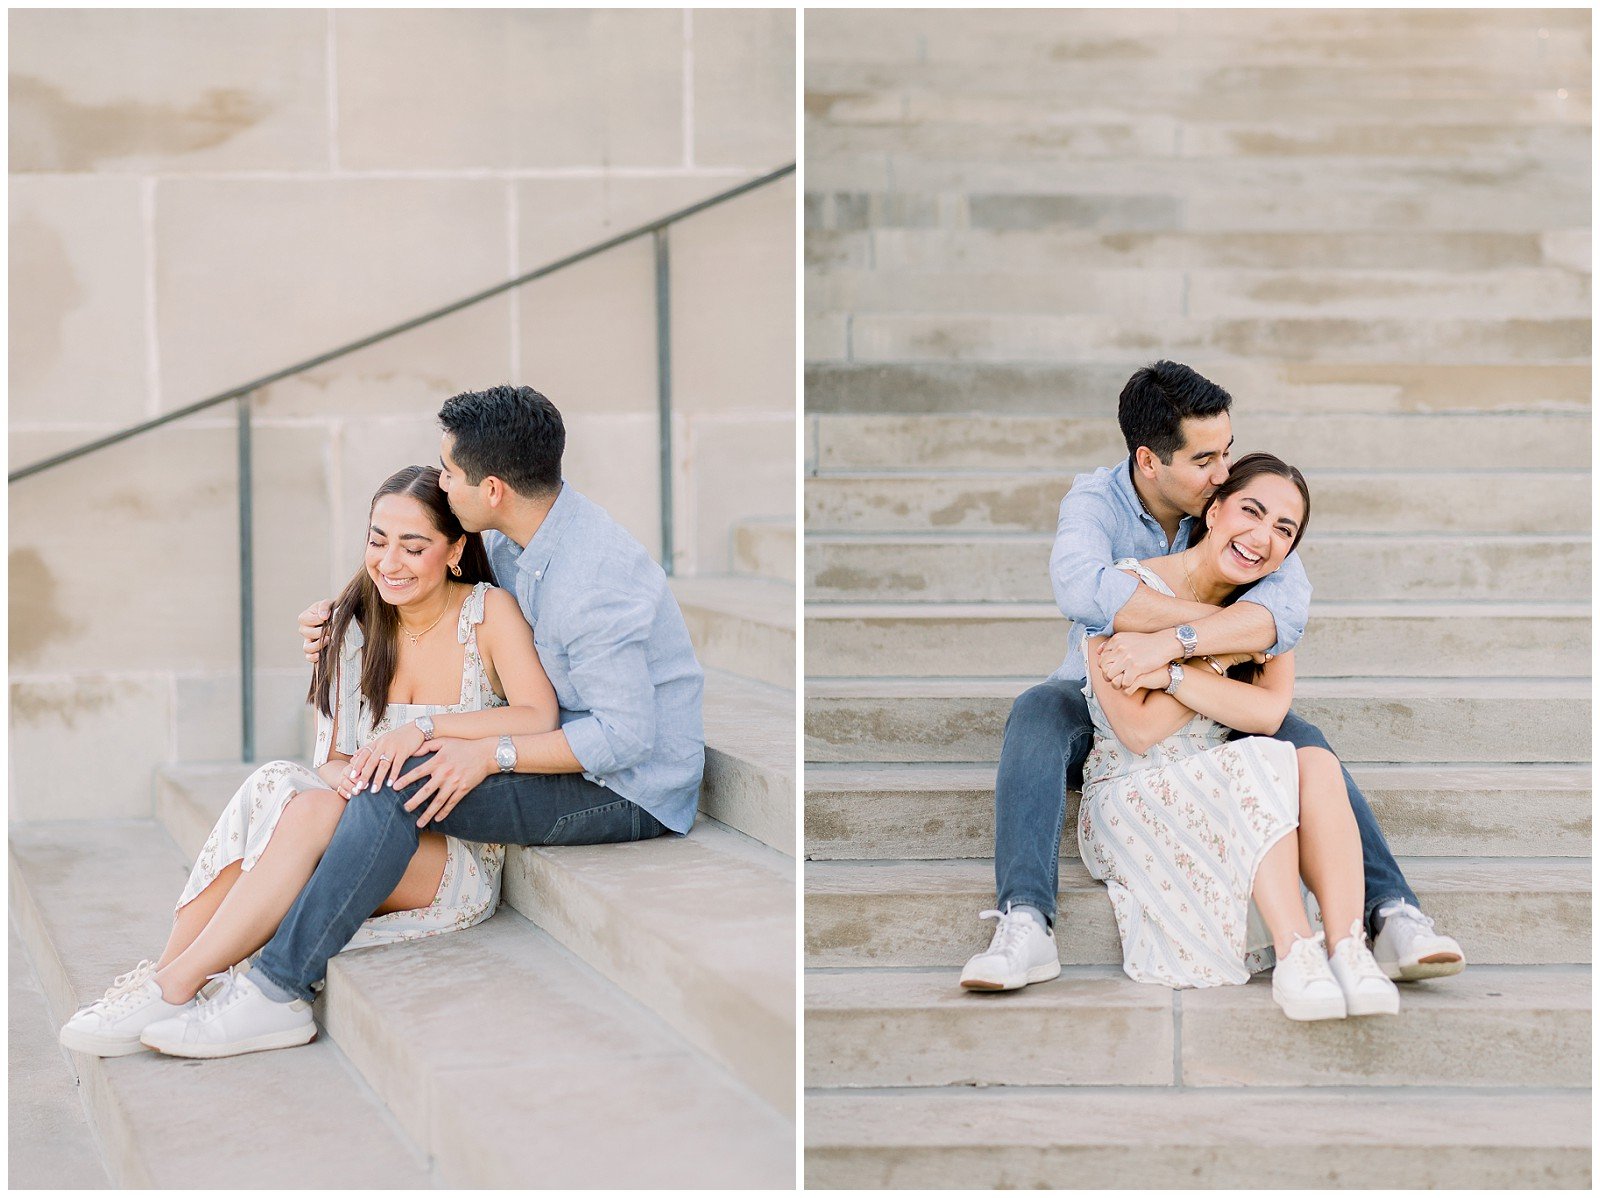 Summer-Engagement-Photos-at-The-Nelson-Atkins-K+S-0522-Elizabeth-Ladean-Photography-photo-_6491.jpg